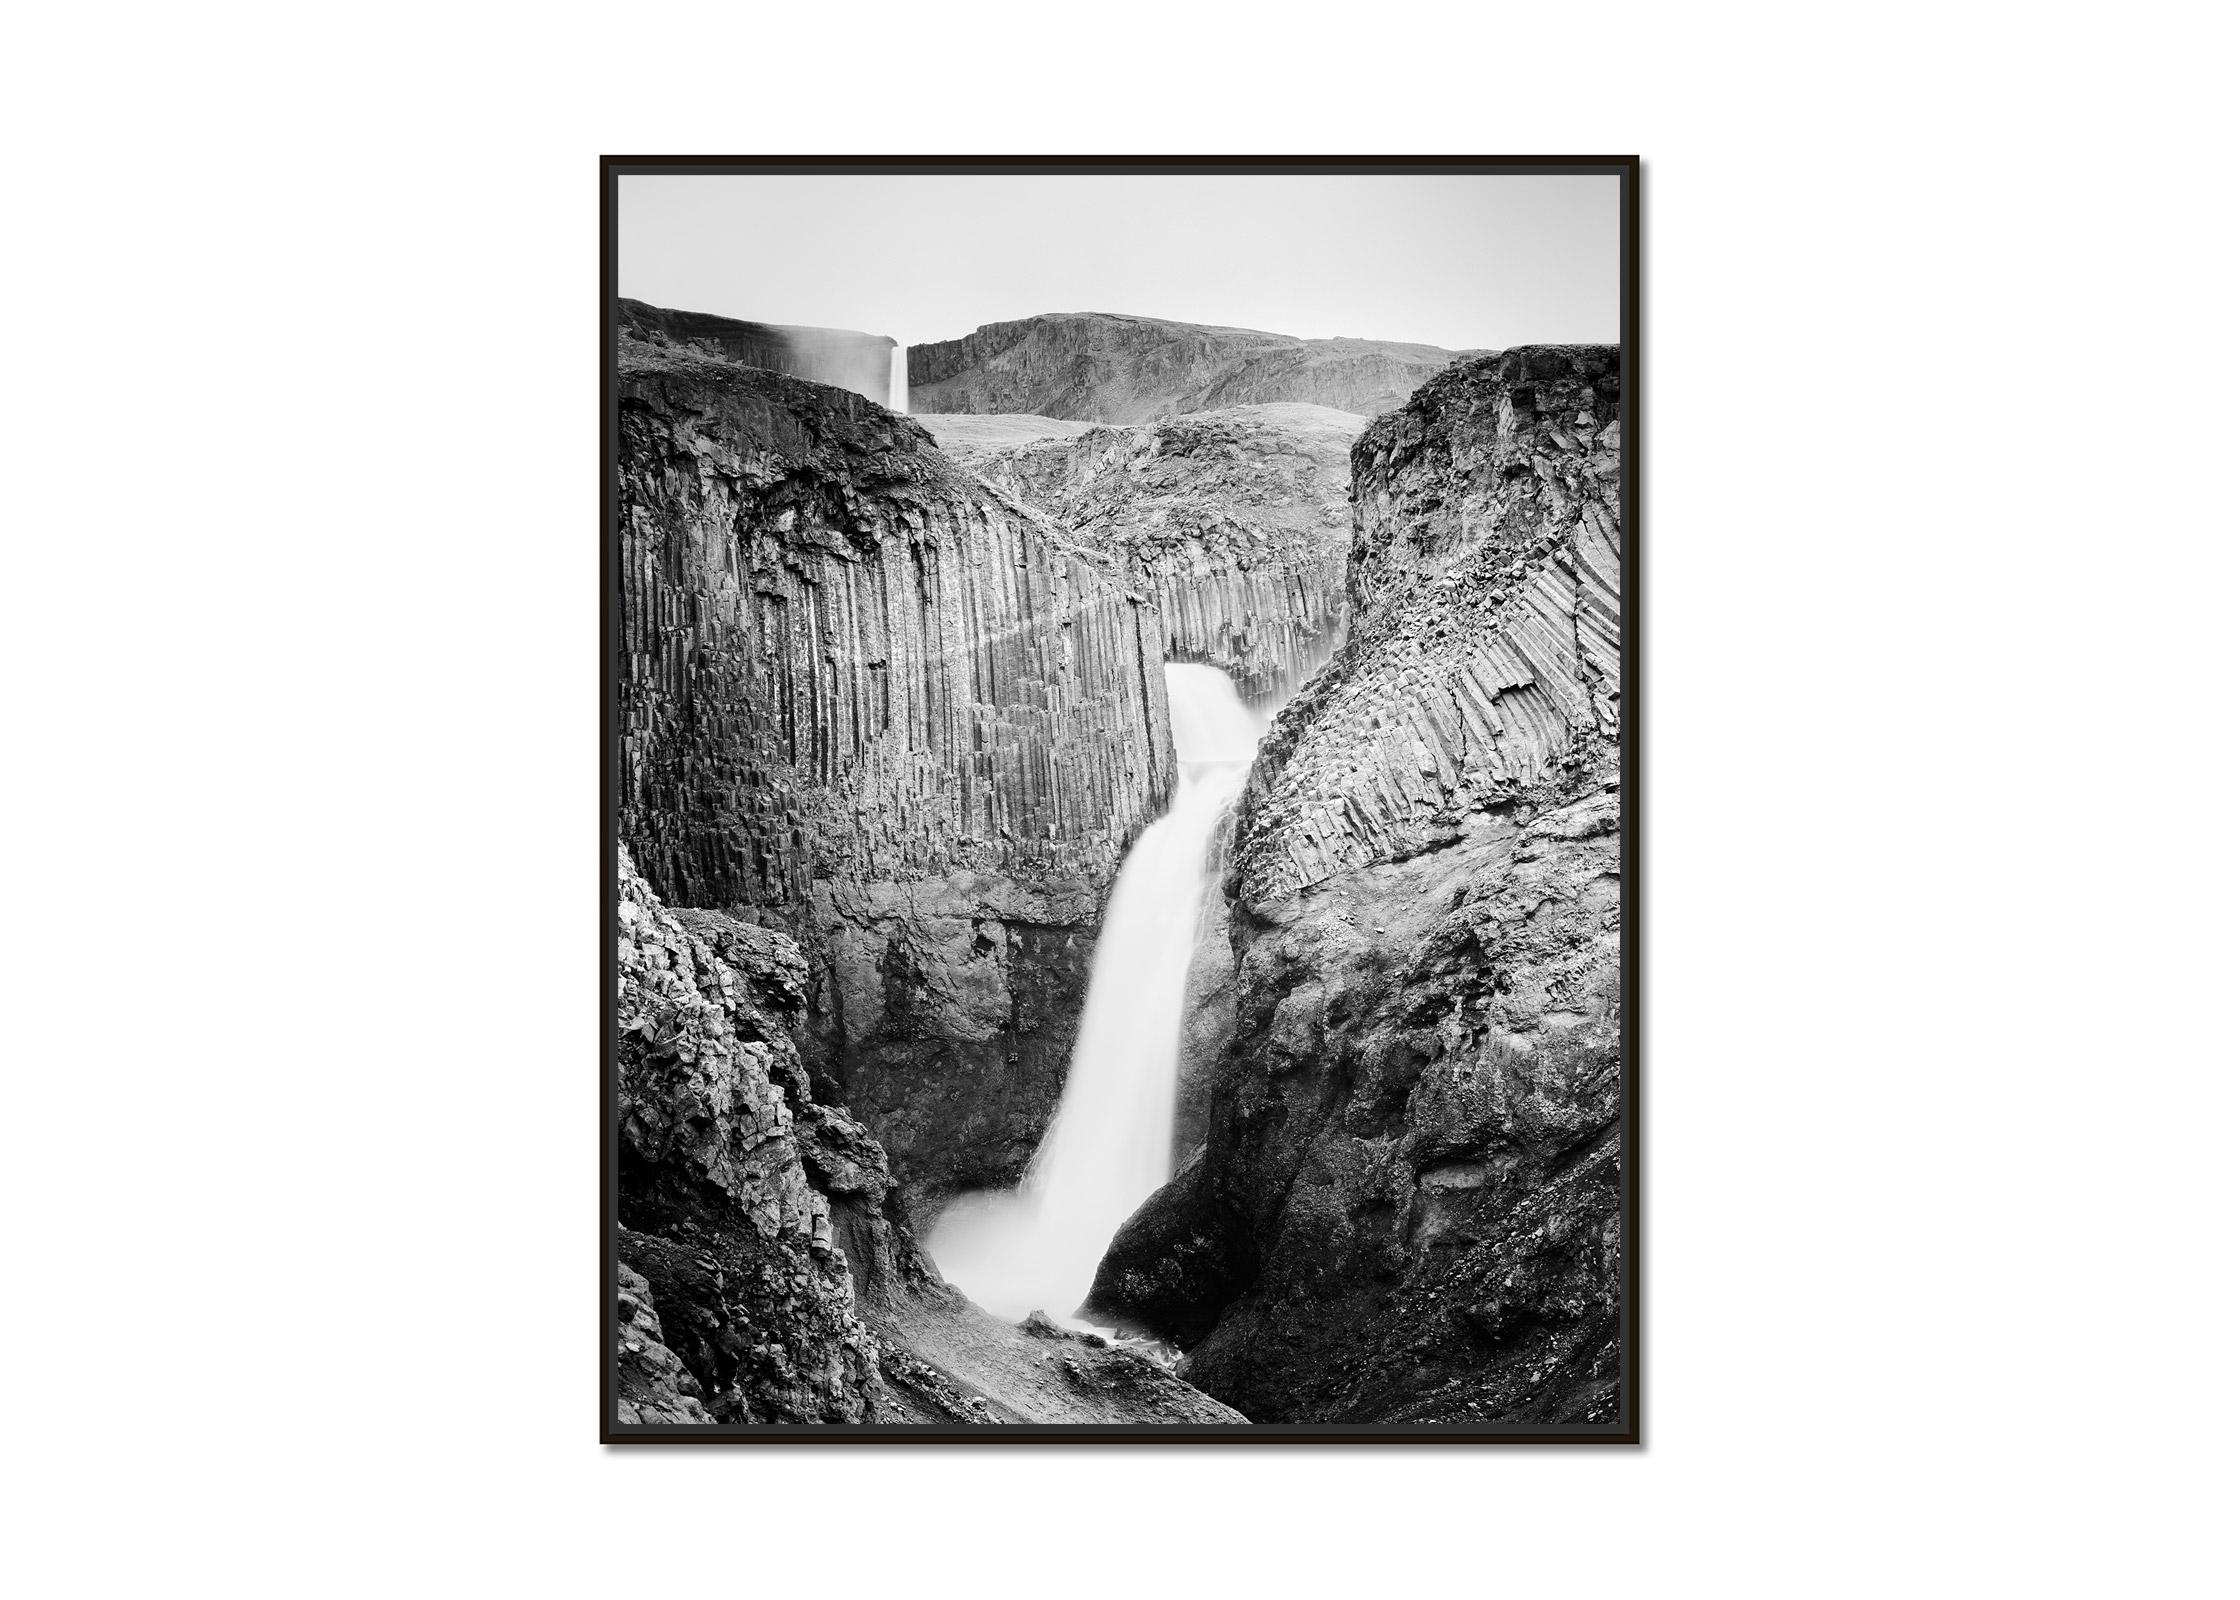 Hengifoss, Waterfall, Iceland, black and white fine art photography, landscape - Photograph by Gerald Berghammer, Ina Forstinger